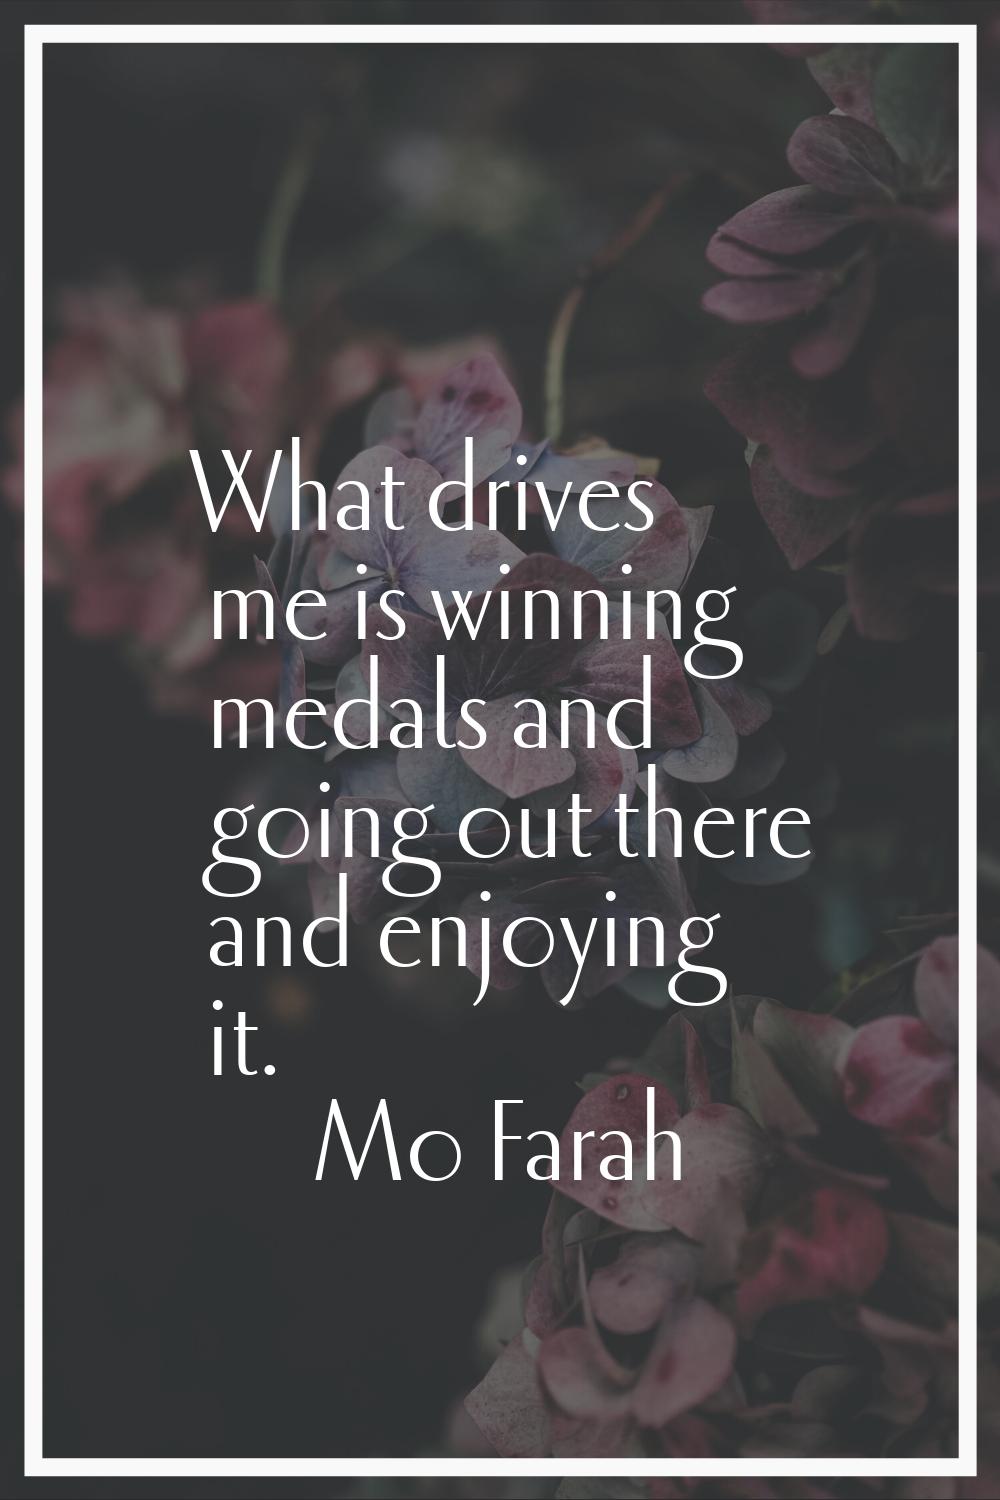 What drives me is winning medals and going out there and enjoying it.